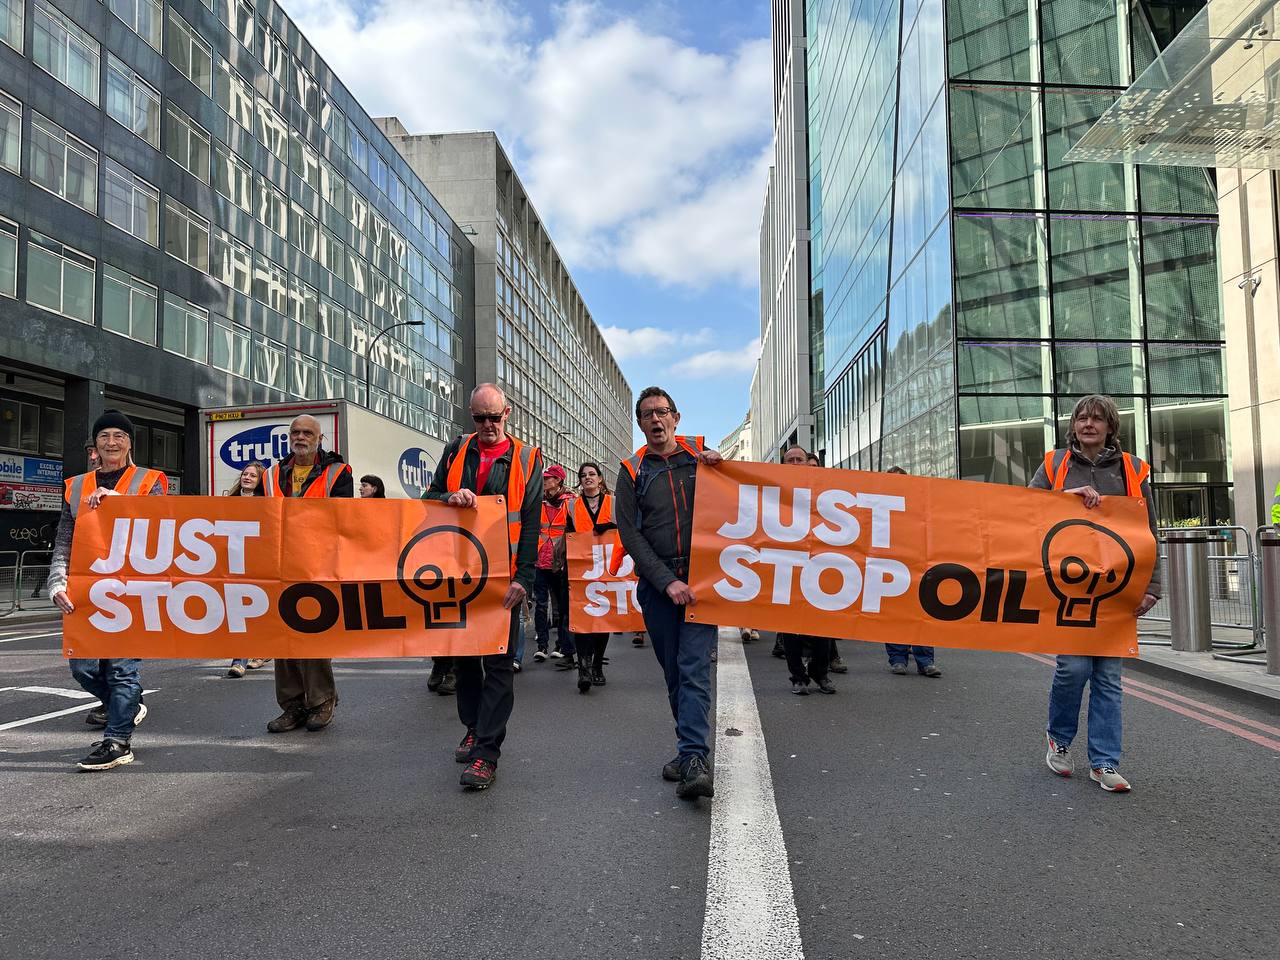 A Just Stop Oil protest in London. Image Credit: Just Stop Oil